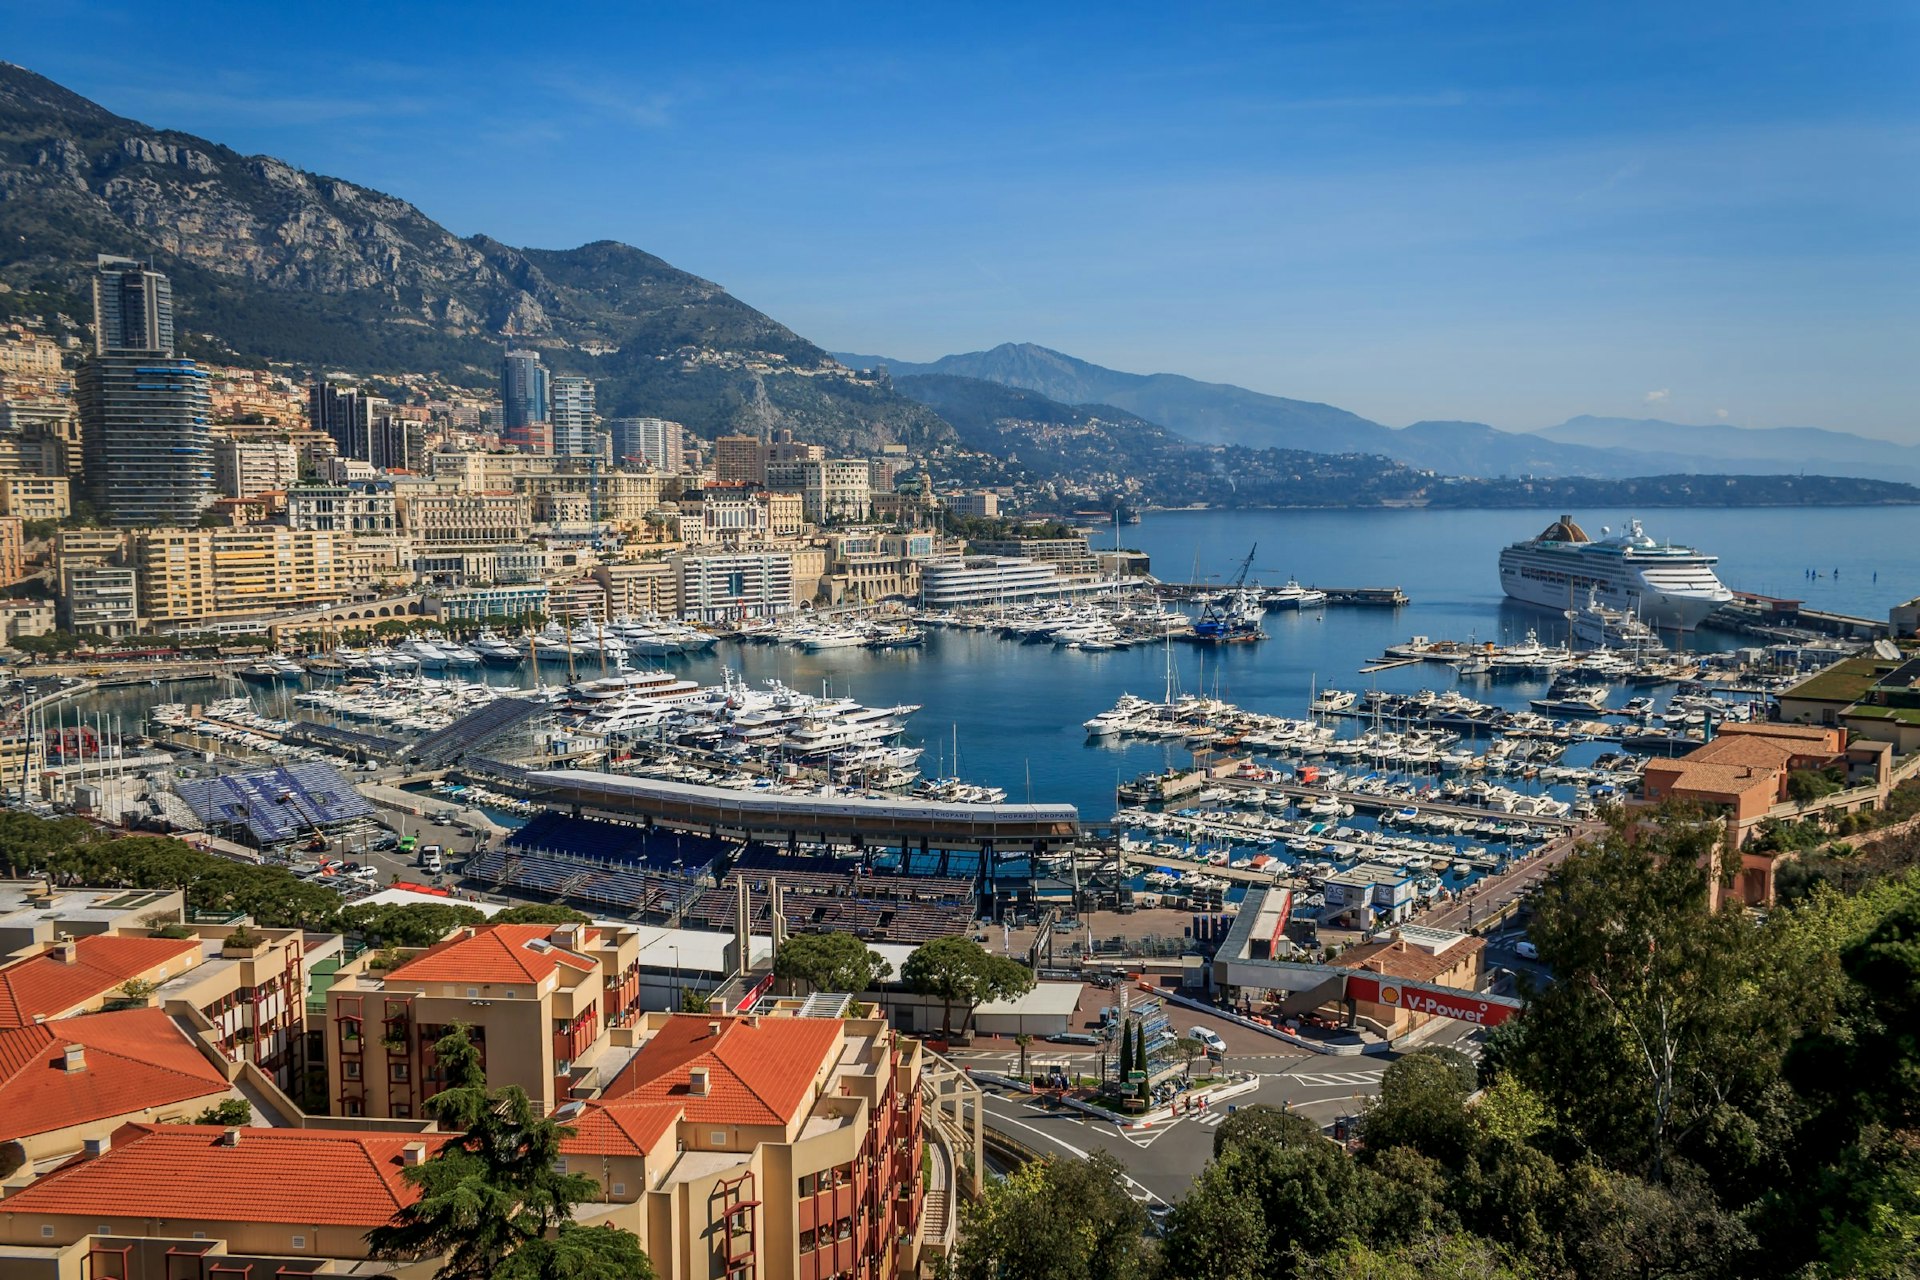 An overhead view of Port Hercule in Monaco as preparations commence for the Grand Prix. Yachts fill the marina and a grandstand overlooks part of the race track.